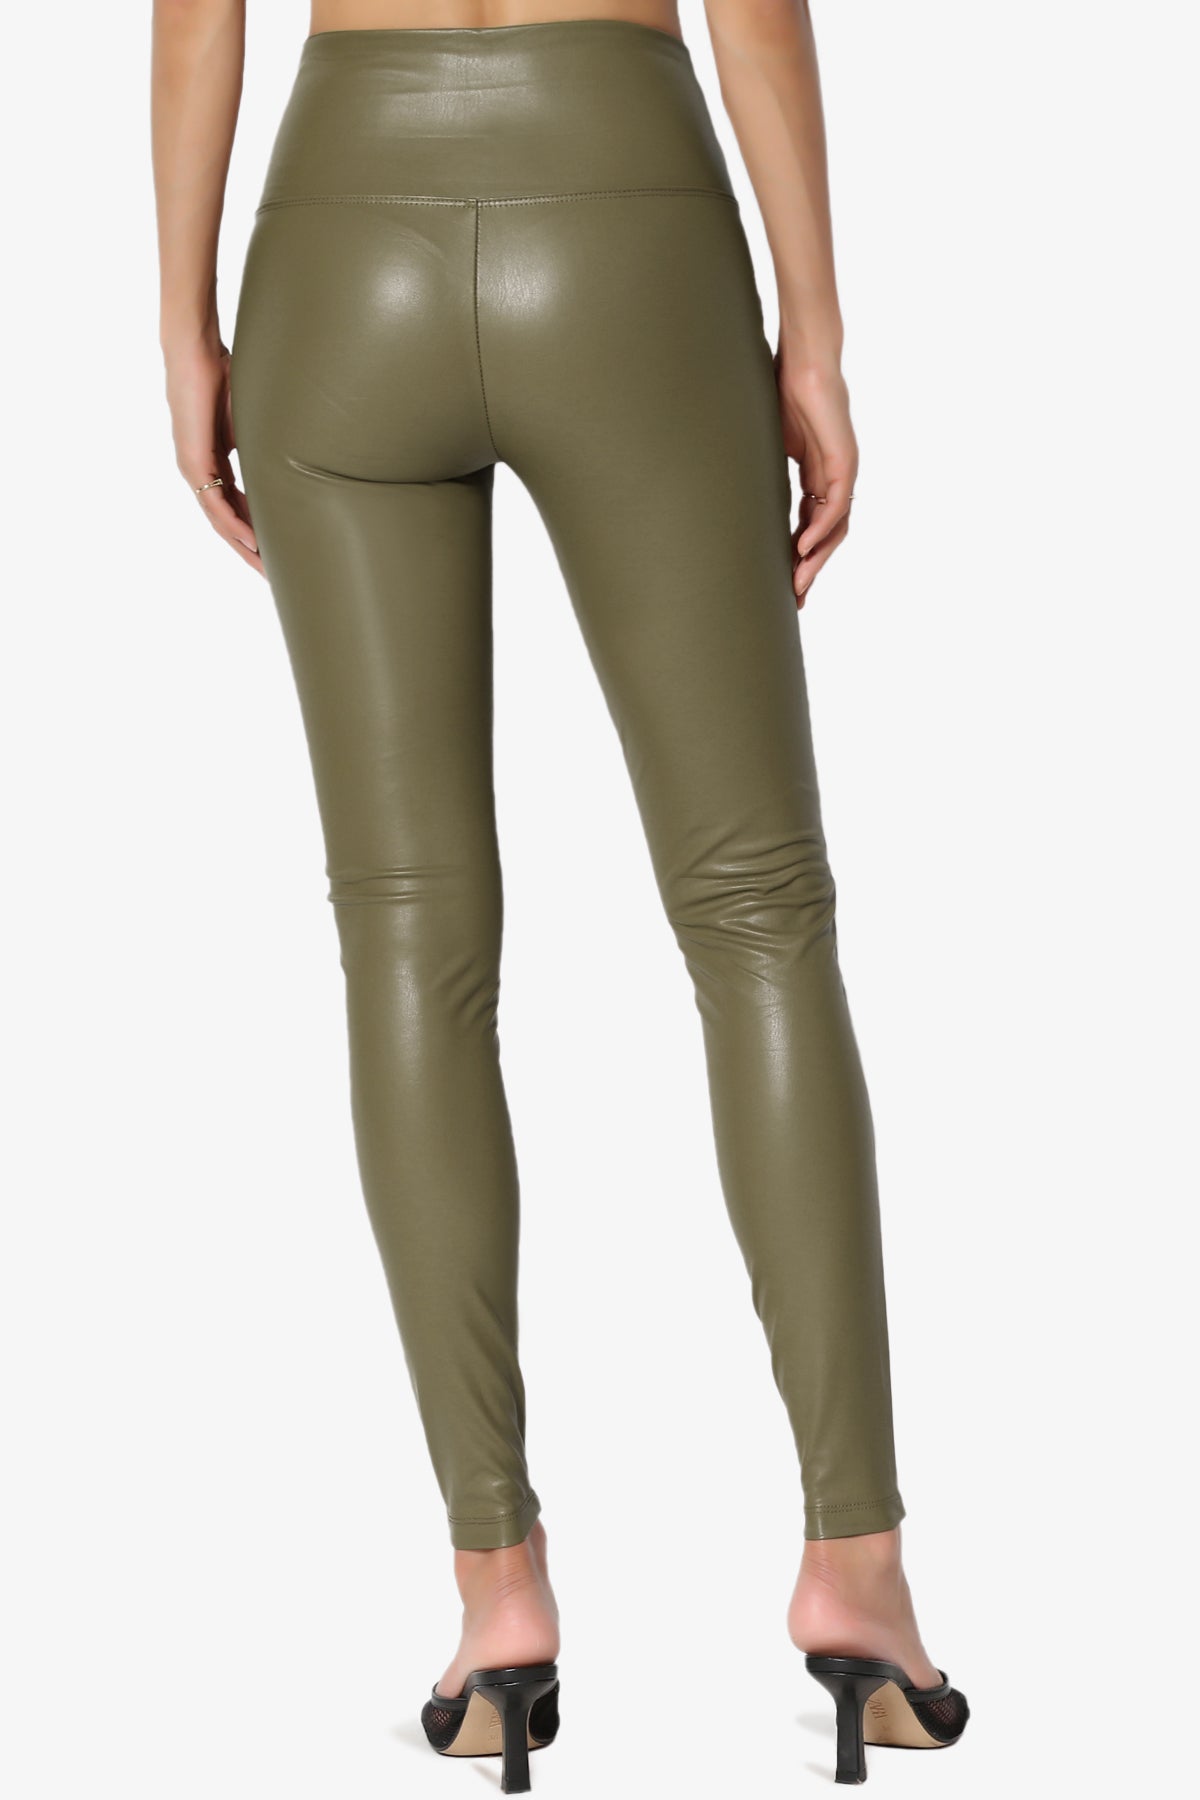 Load image into Gallery viewer, Mayari High Rise Faux Leather Leggings OLIVE KHAKI_2
